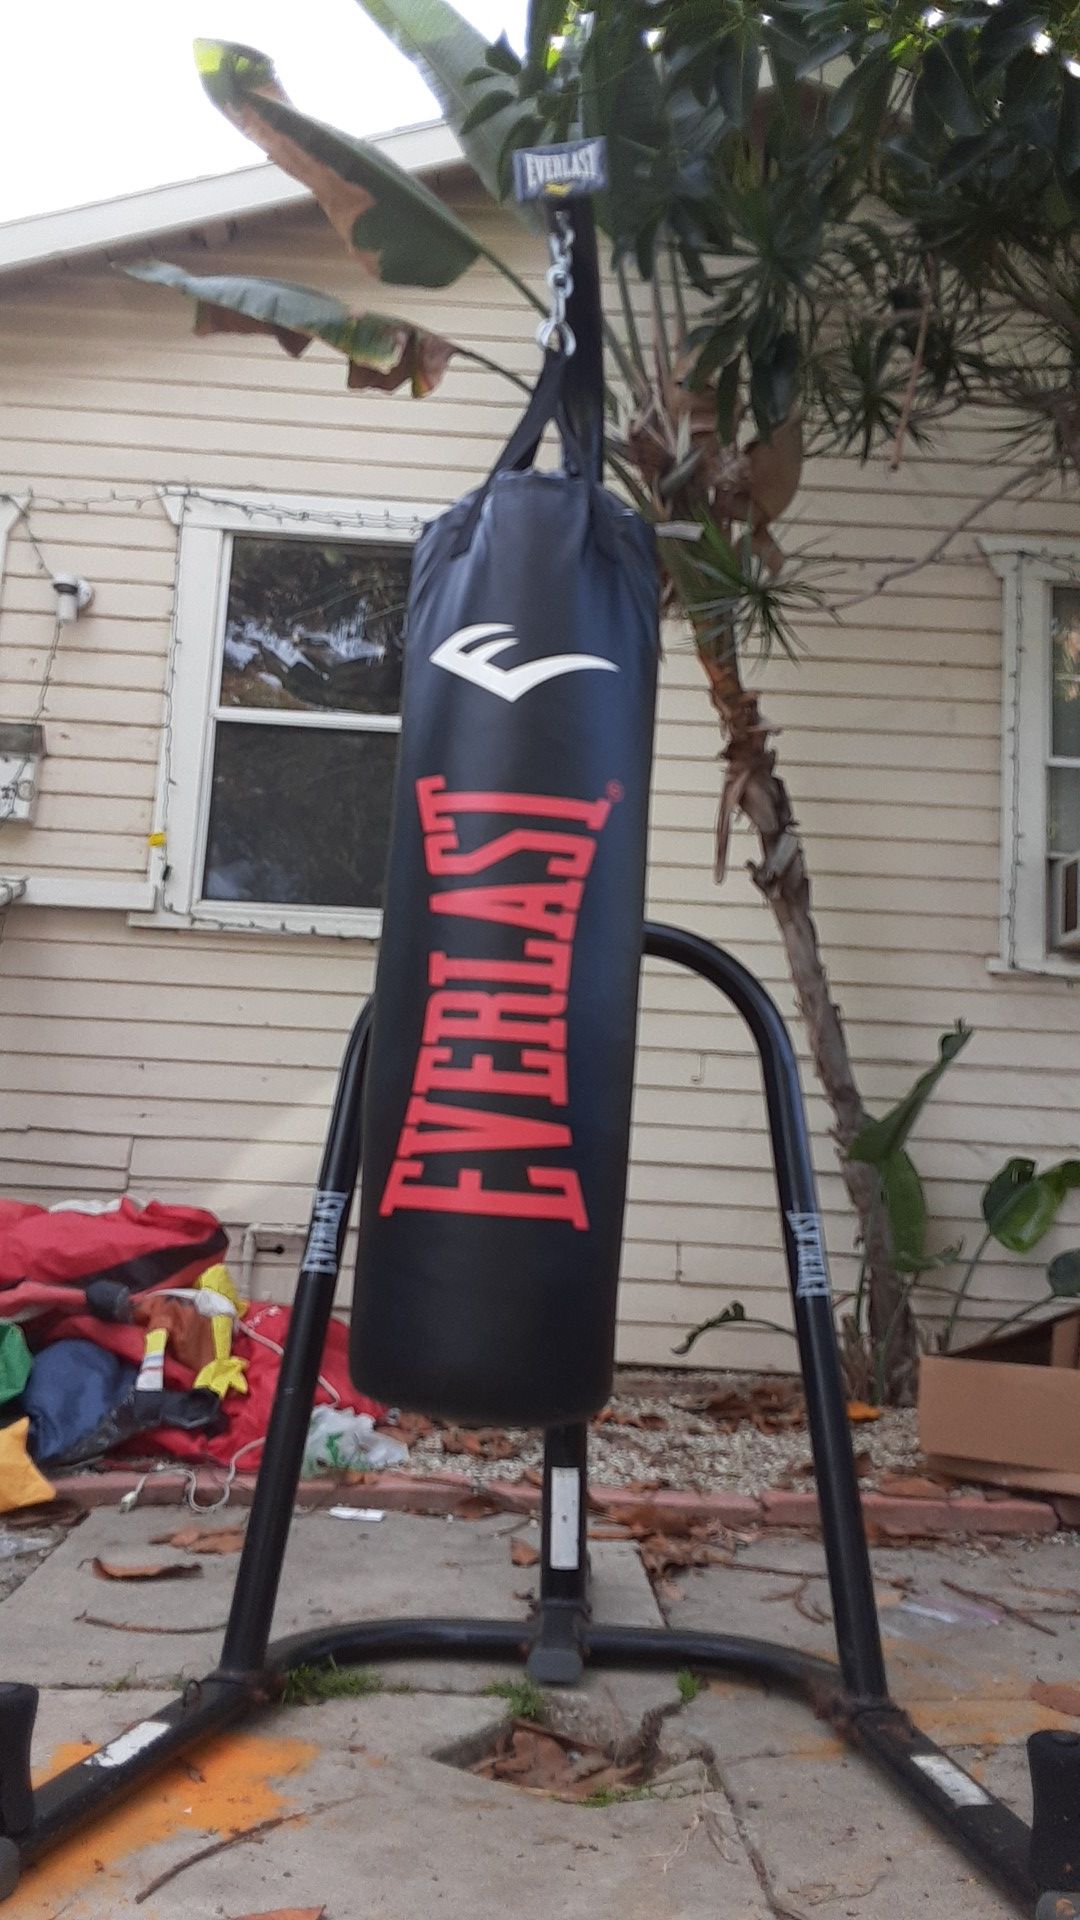 Heavy bag and heavy bag stand